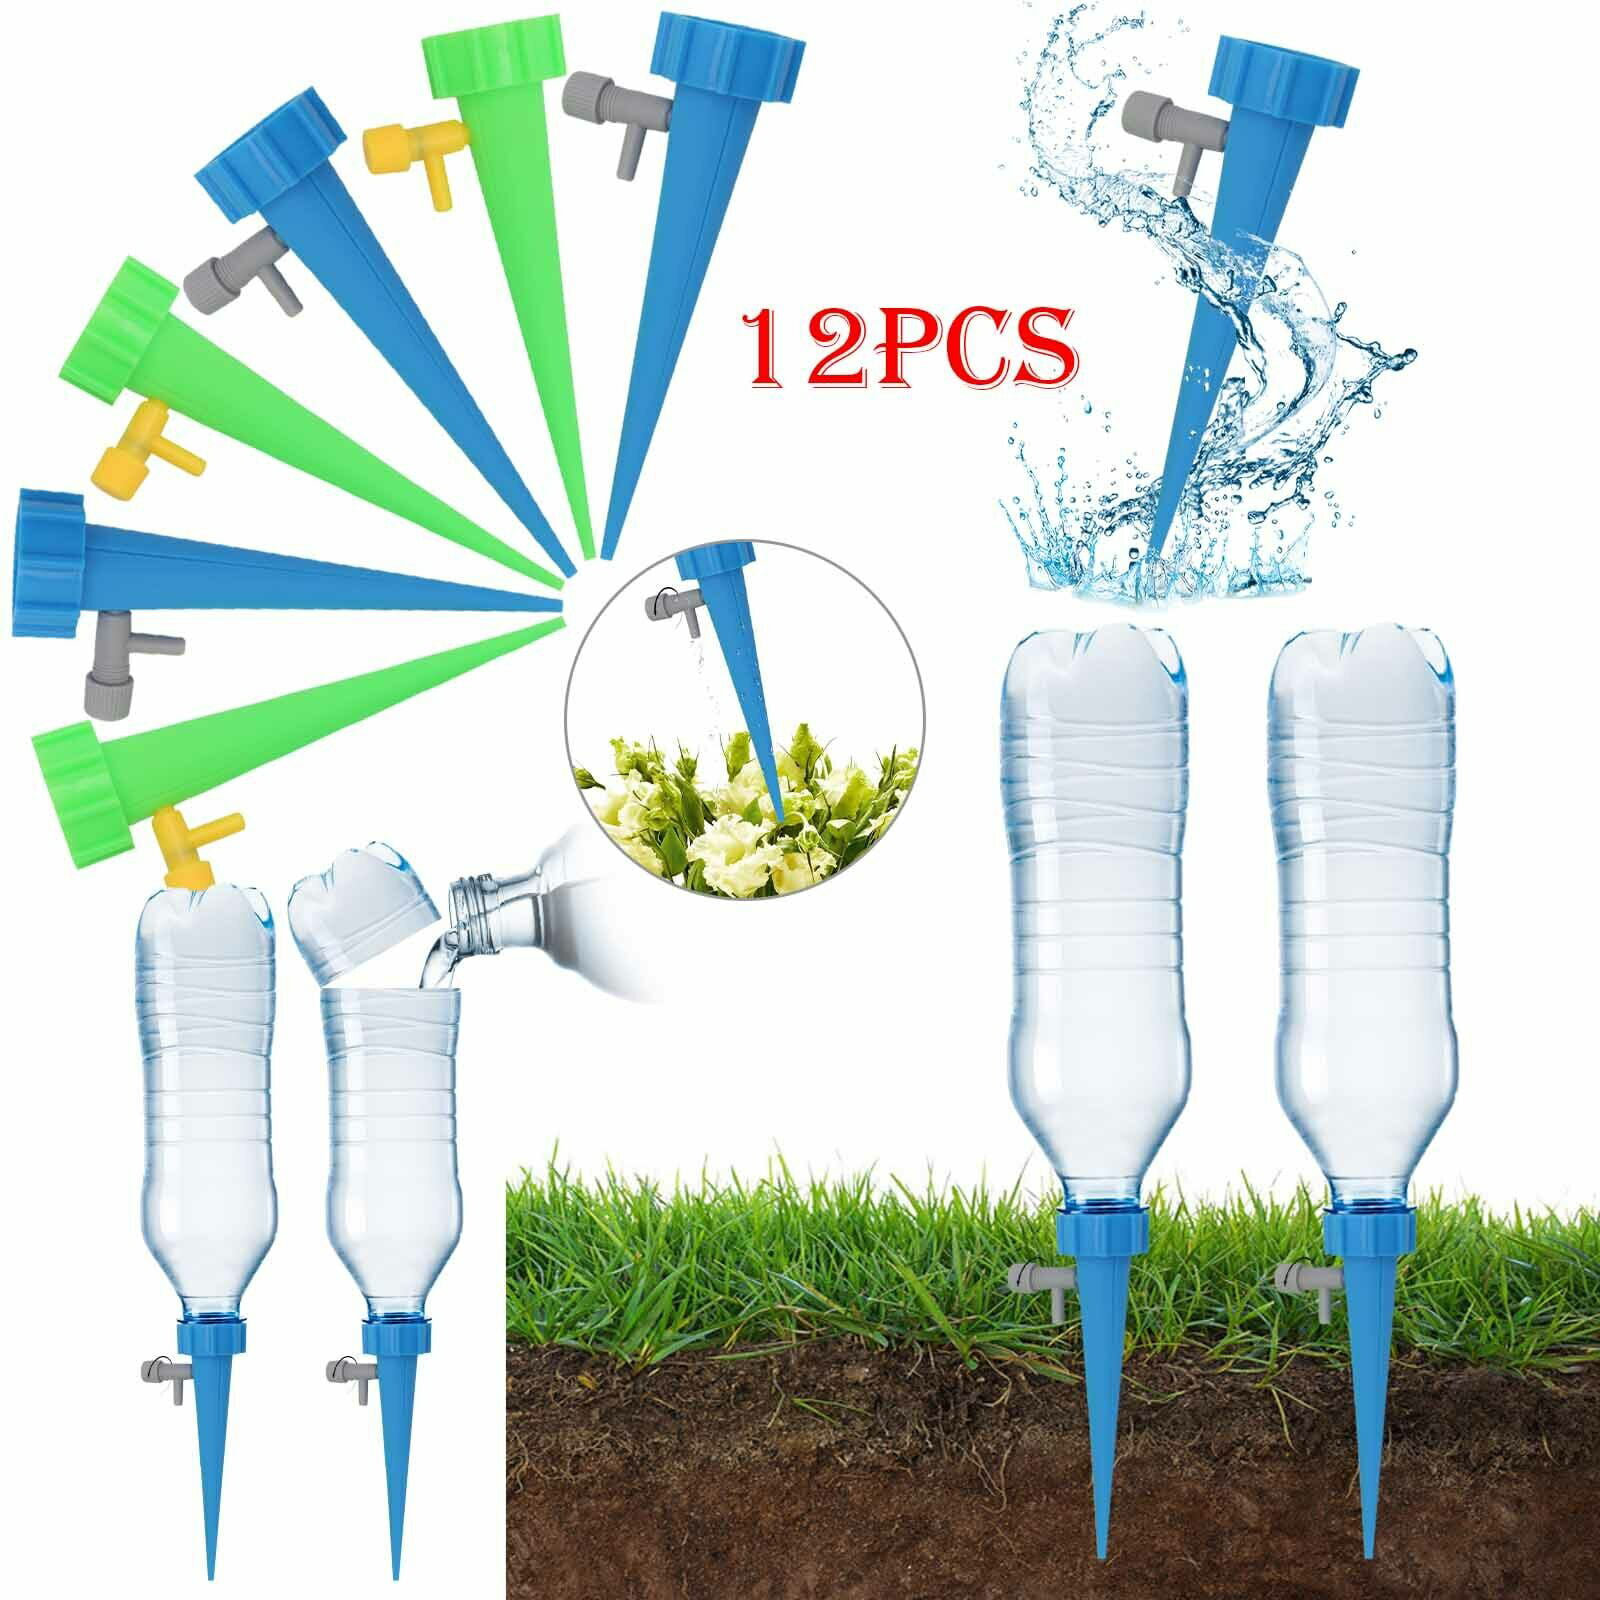 12* Automatic Self Watering Spikes System Plant Water-er Garden Home Pot Tool US 